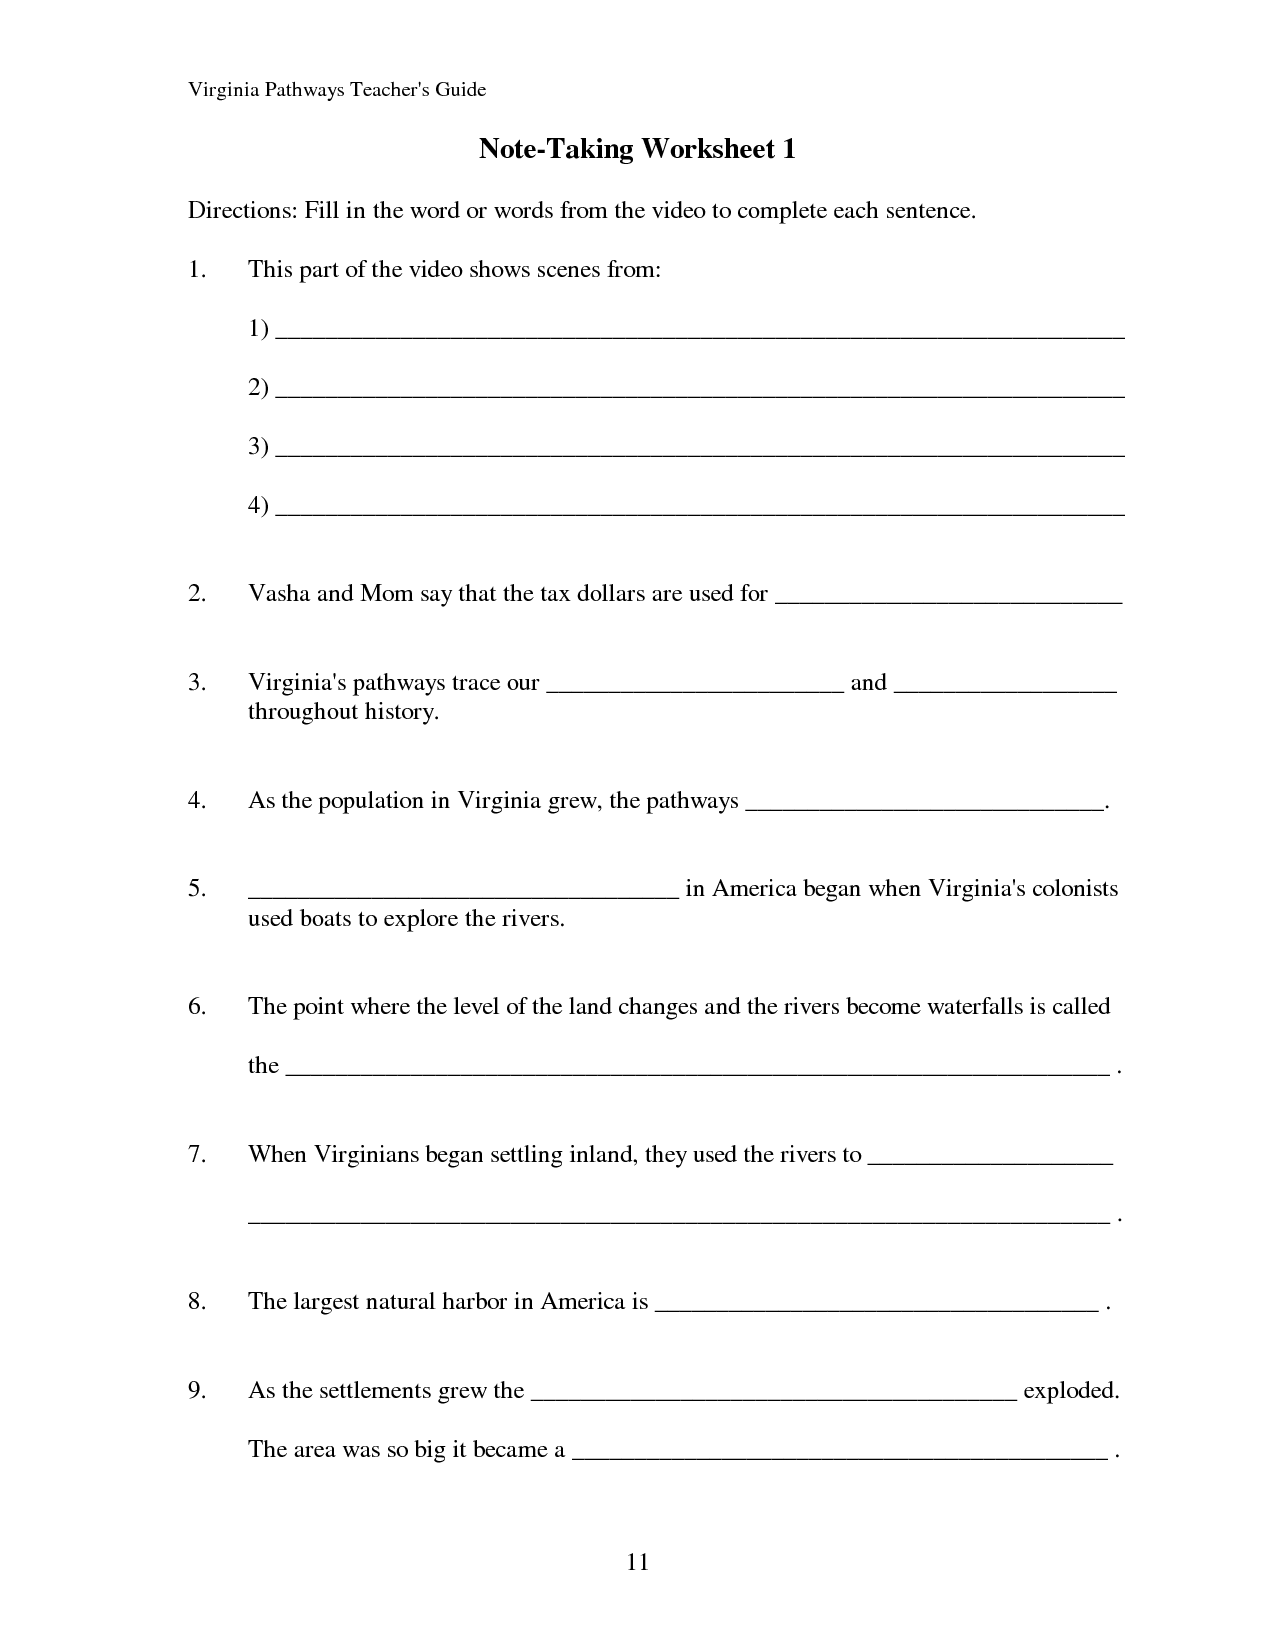 5-best-images-of-printable-blank-note-taking-worksheets-blank-cornell